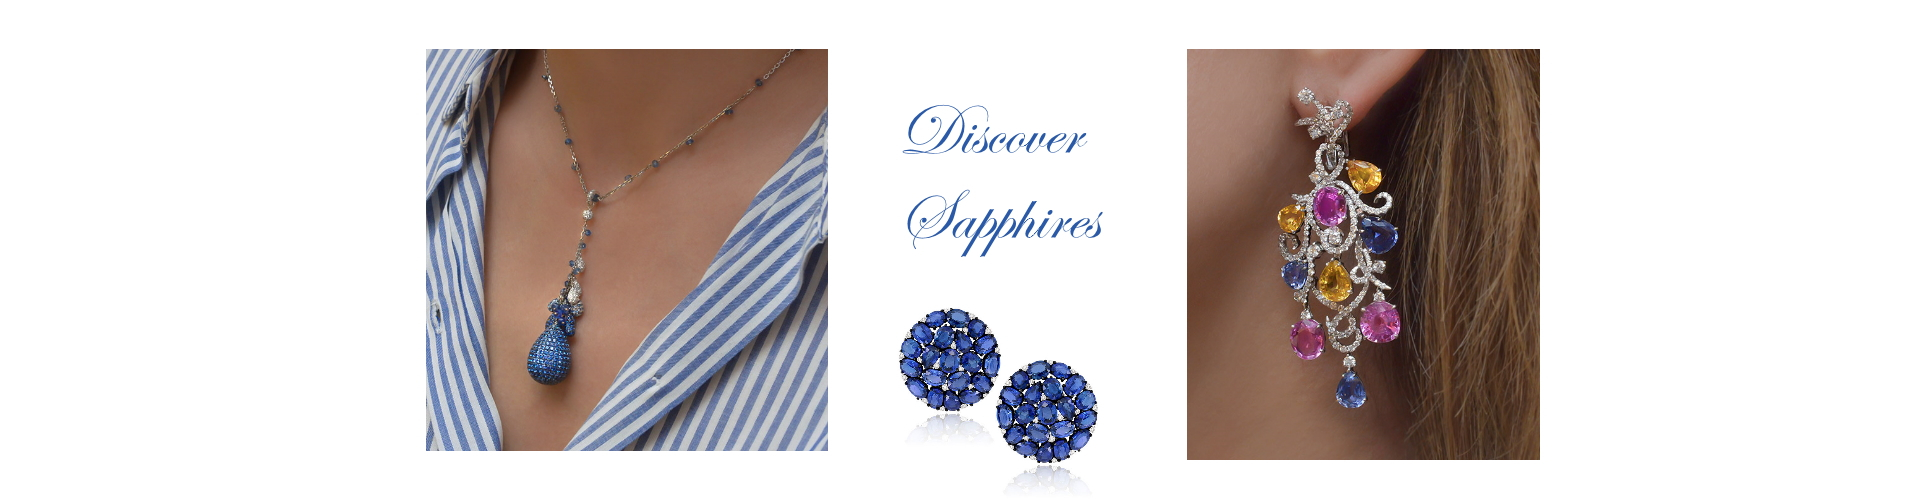 Jewelry Discover Sapphires